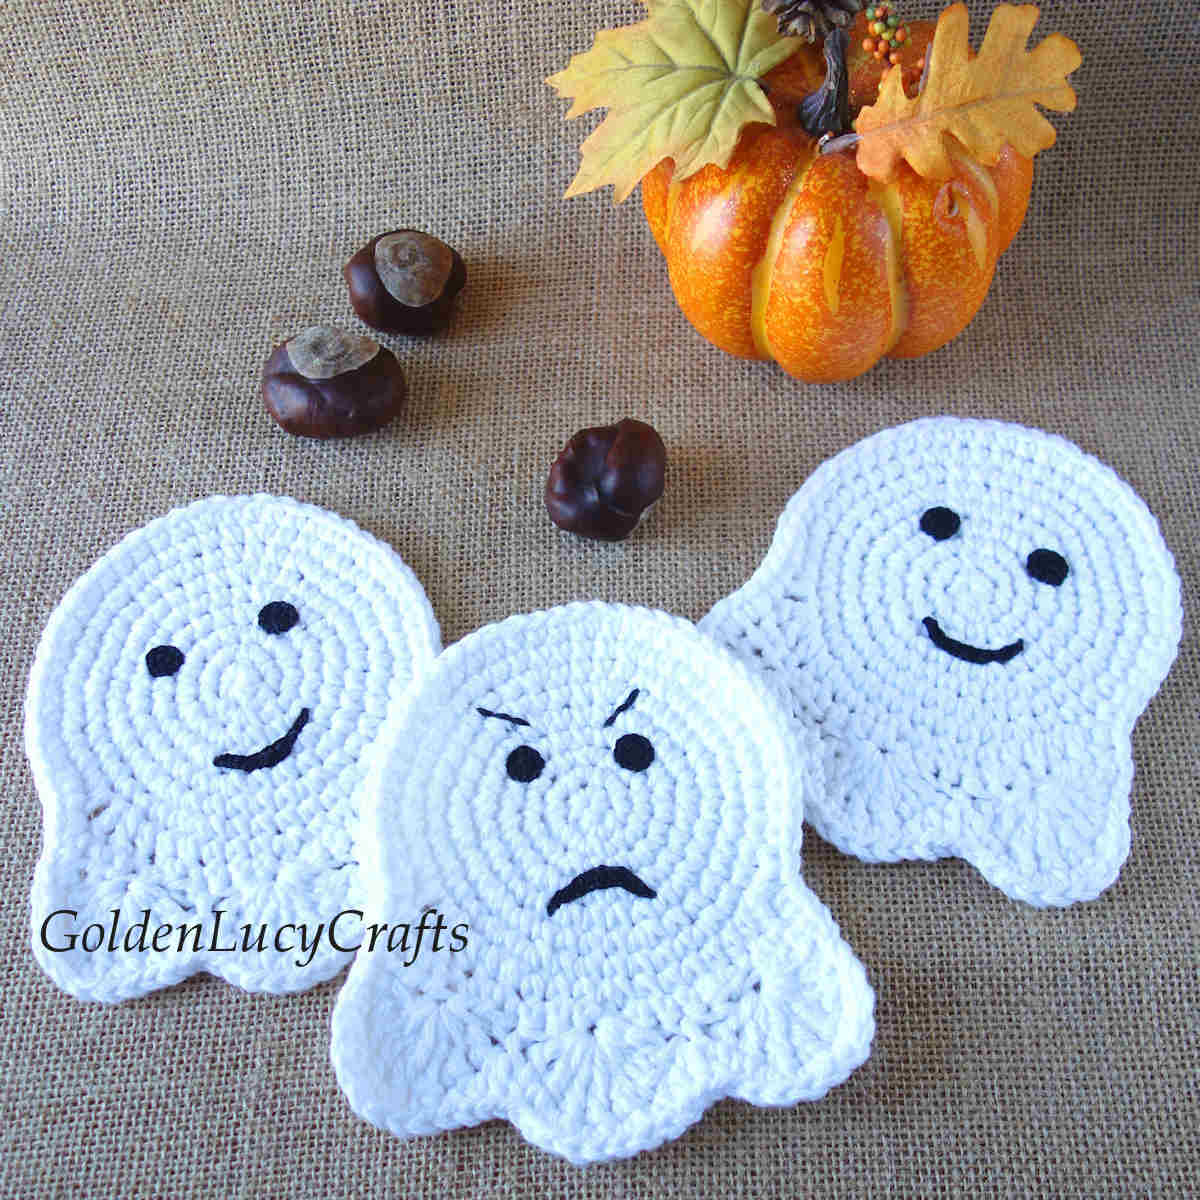 Three crocheted ghost coasters, pumpkin in the background.